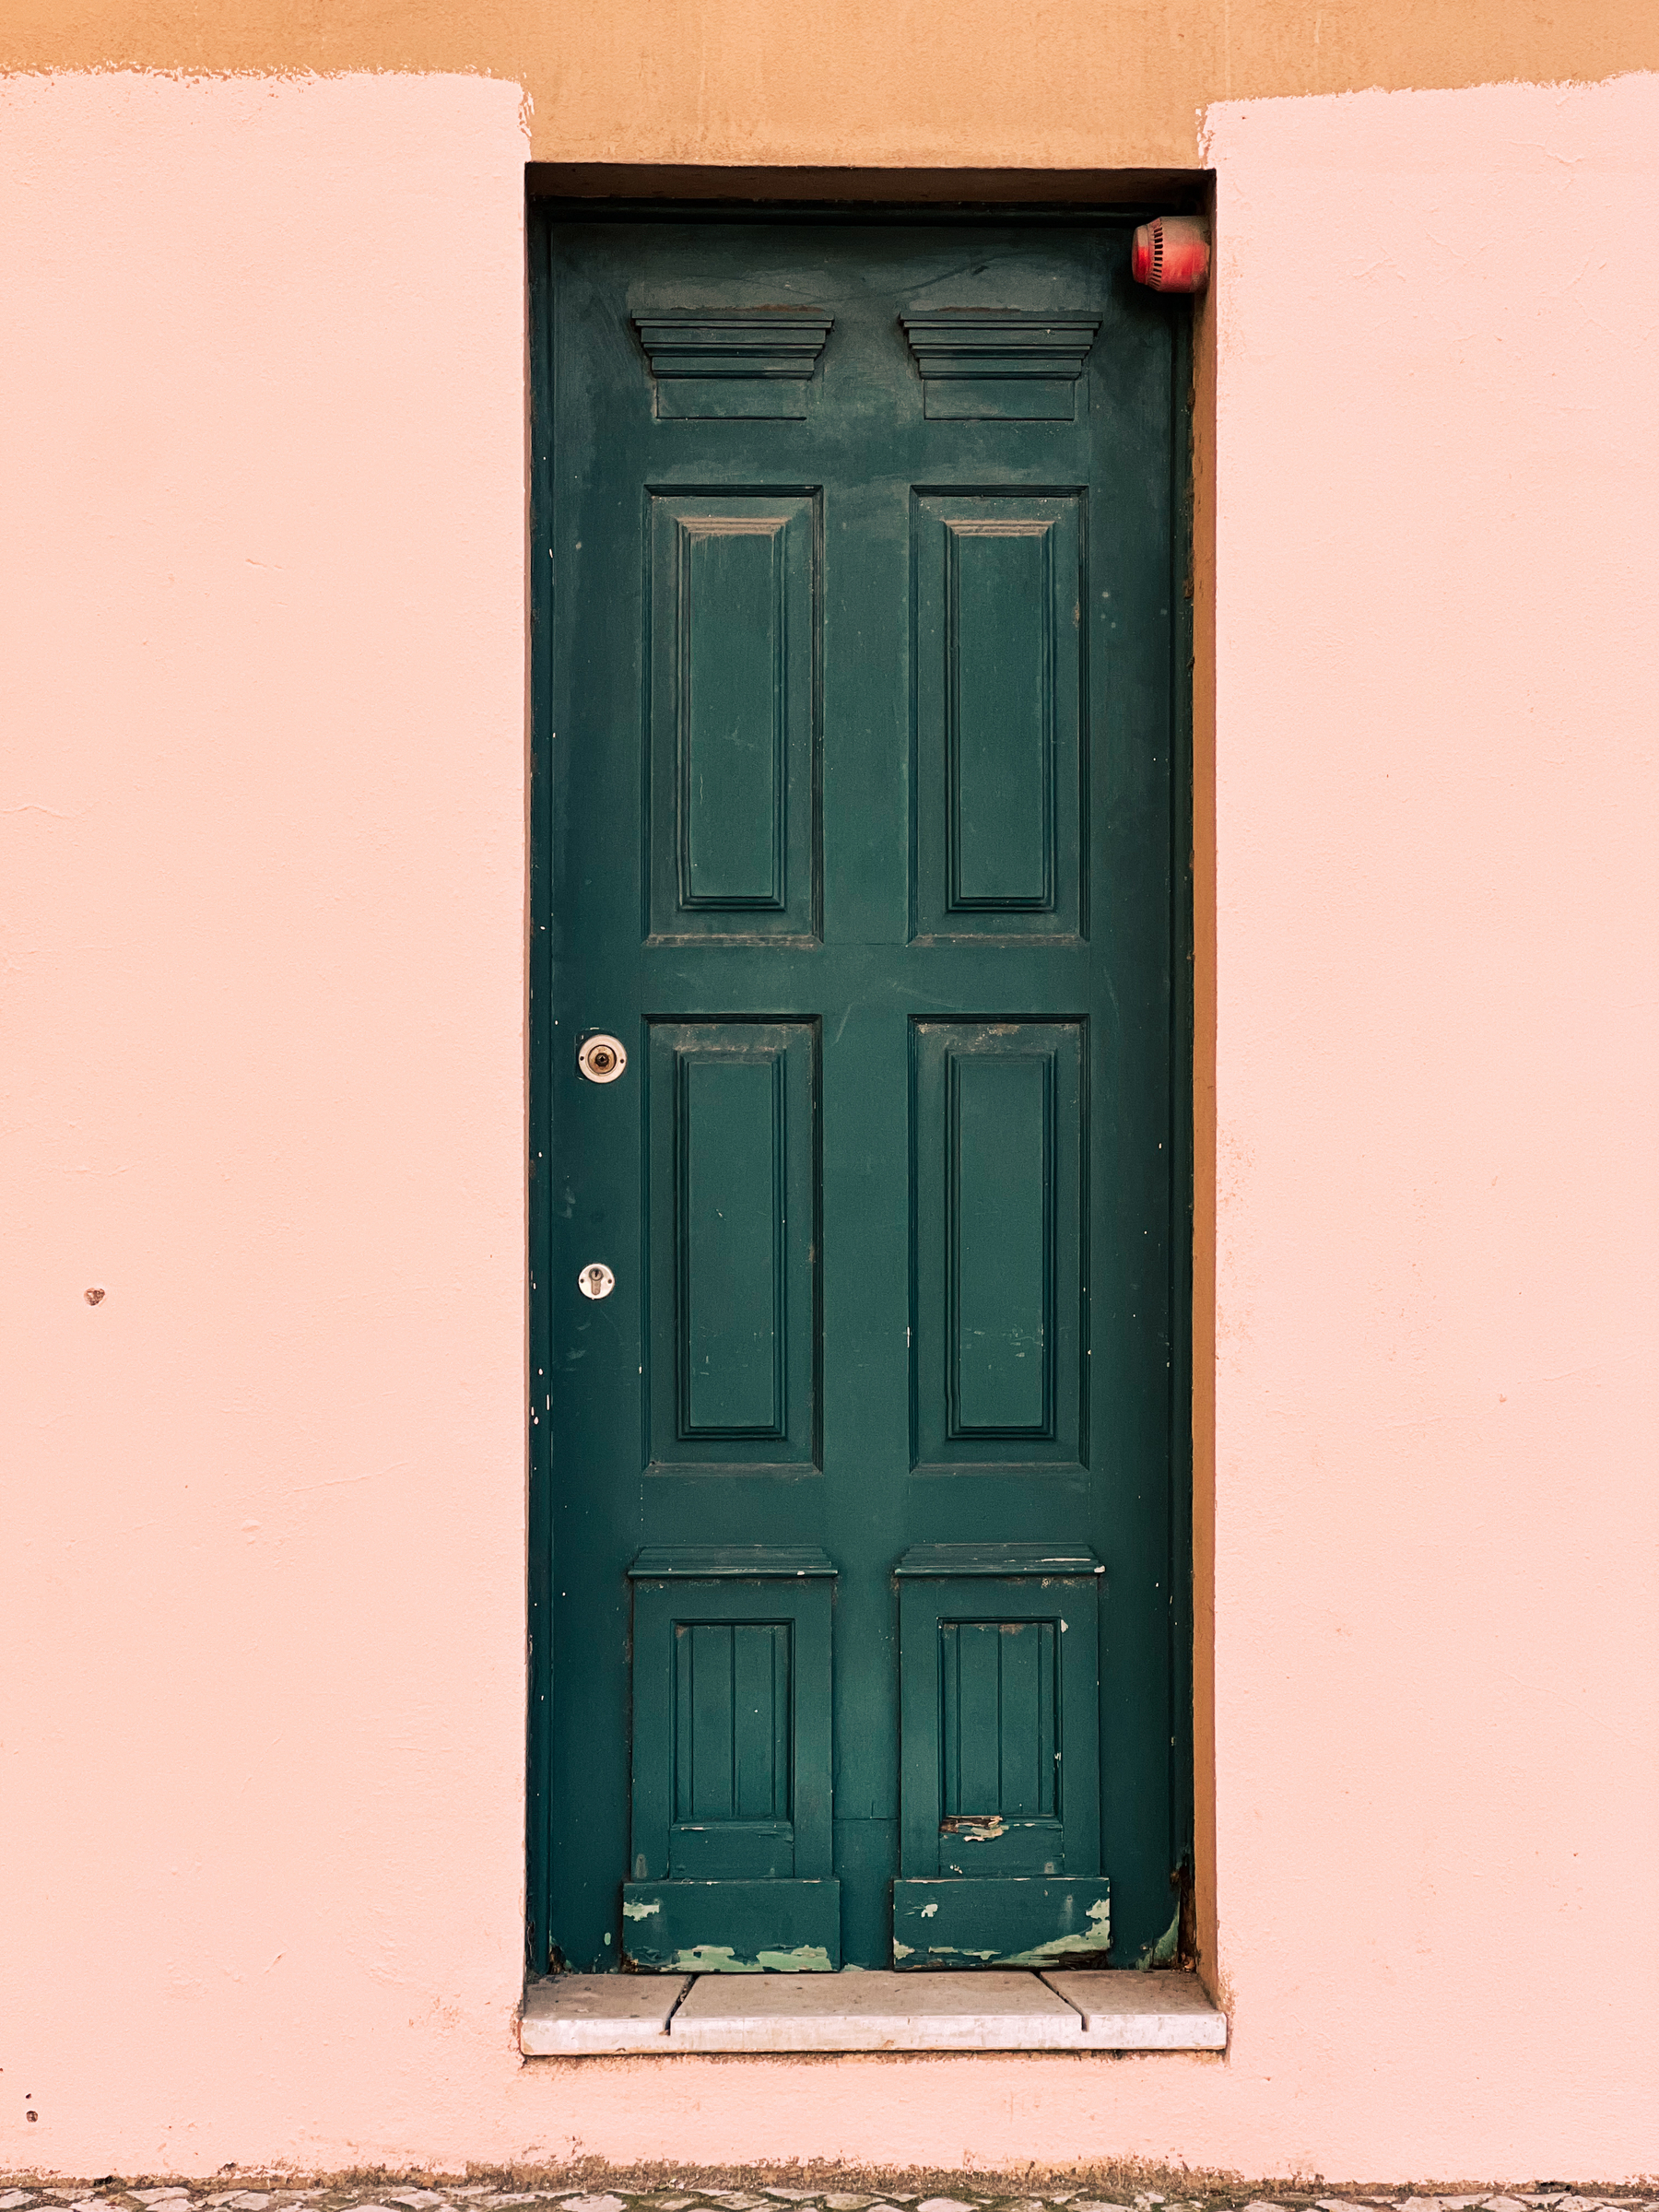 A weathered dark green door set within a peach-colored wall.